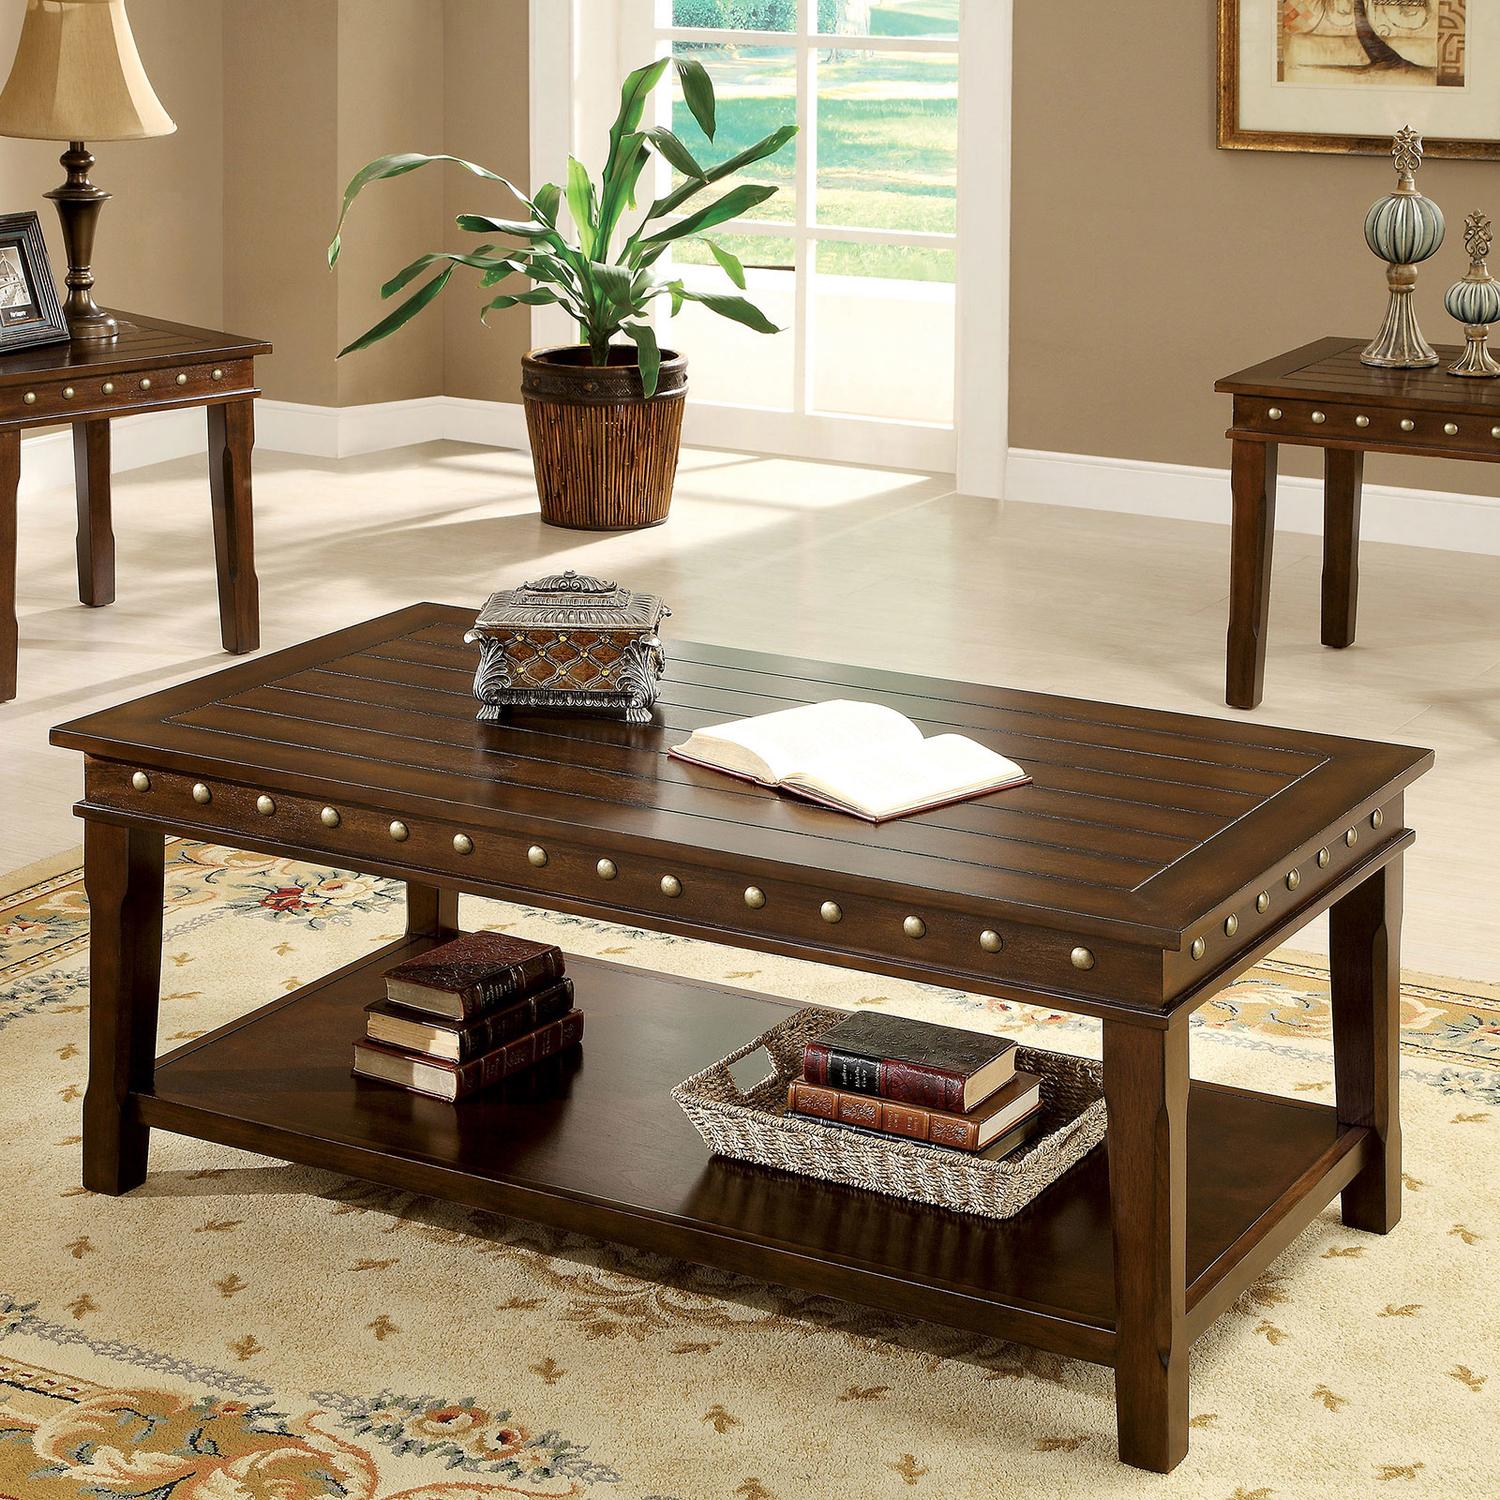 Transitional Coffee Table and 2 End Tables CM4630-3PK Fenwick CM4630-3PK in Walnut 